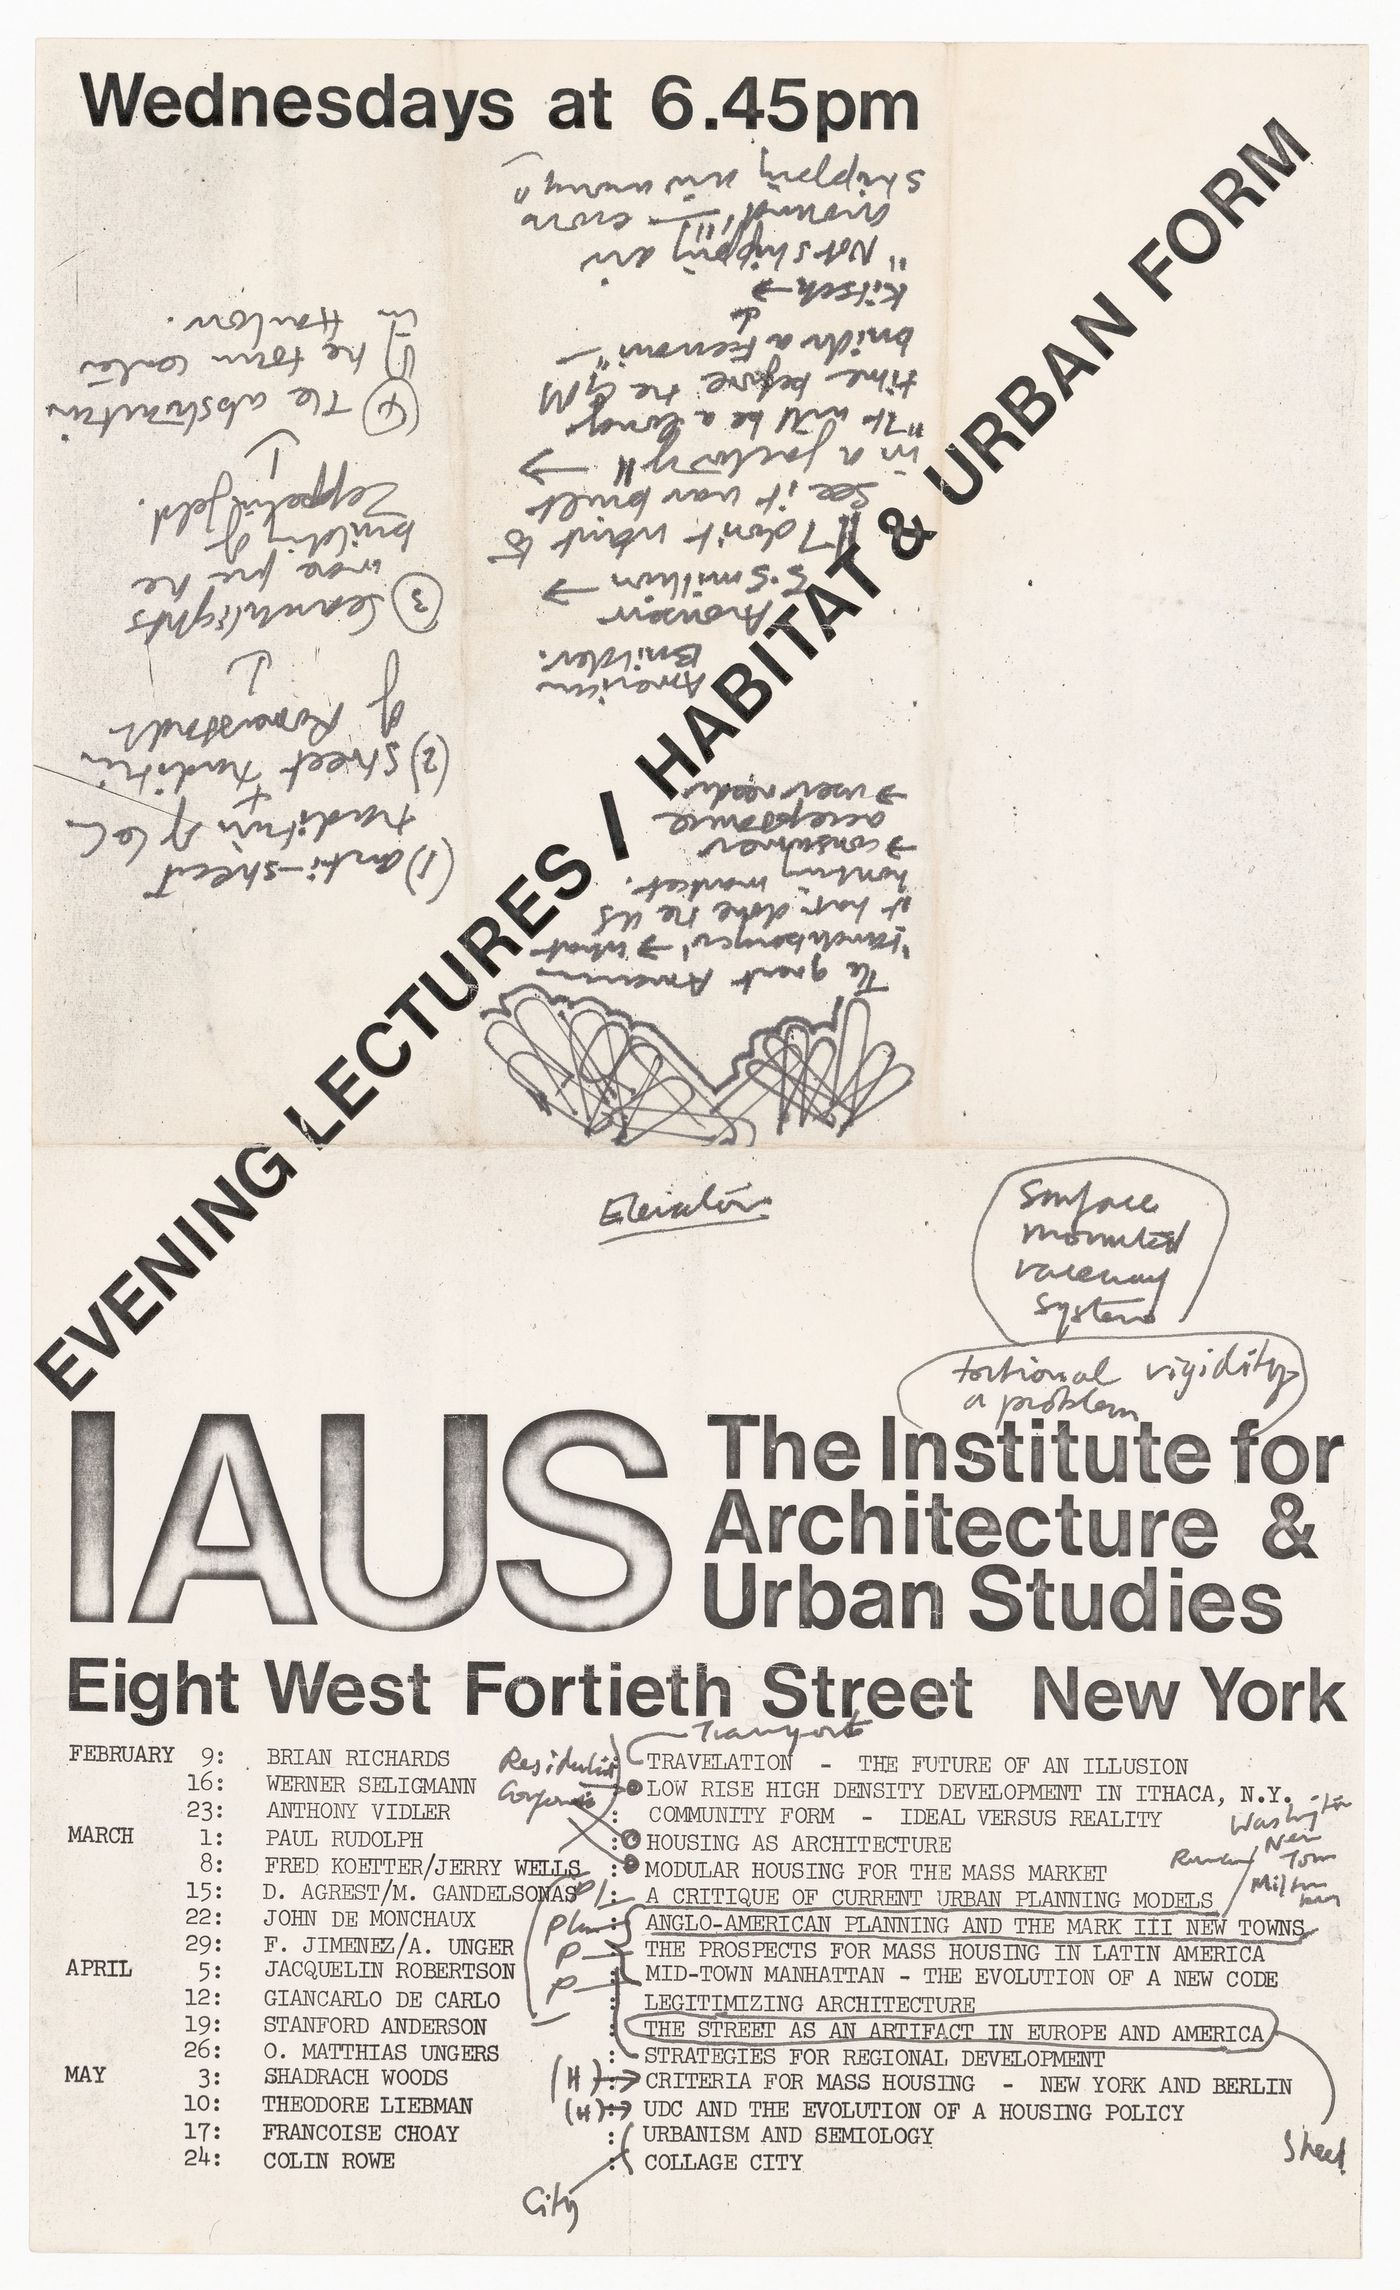 Edited draft poster of the Institute for Architecture and Urban Studies lecture series